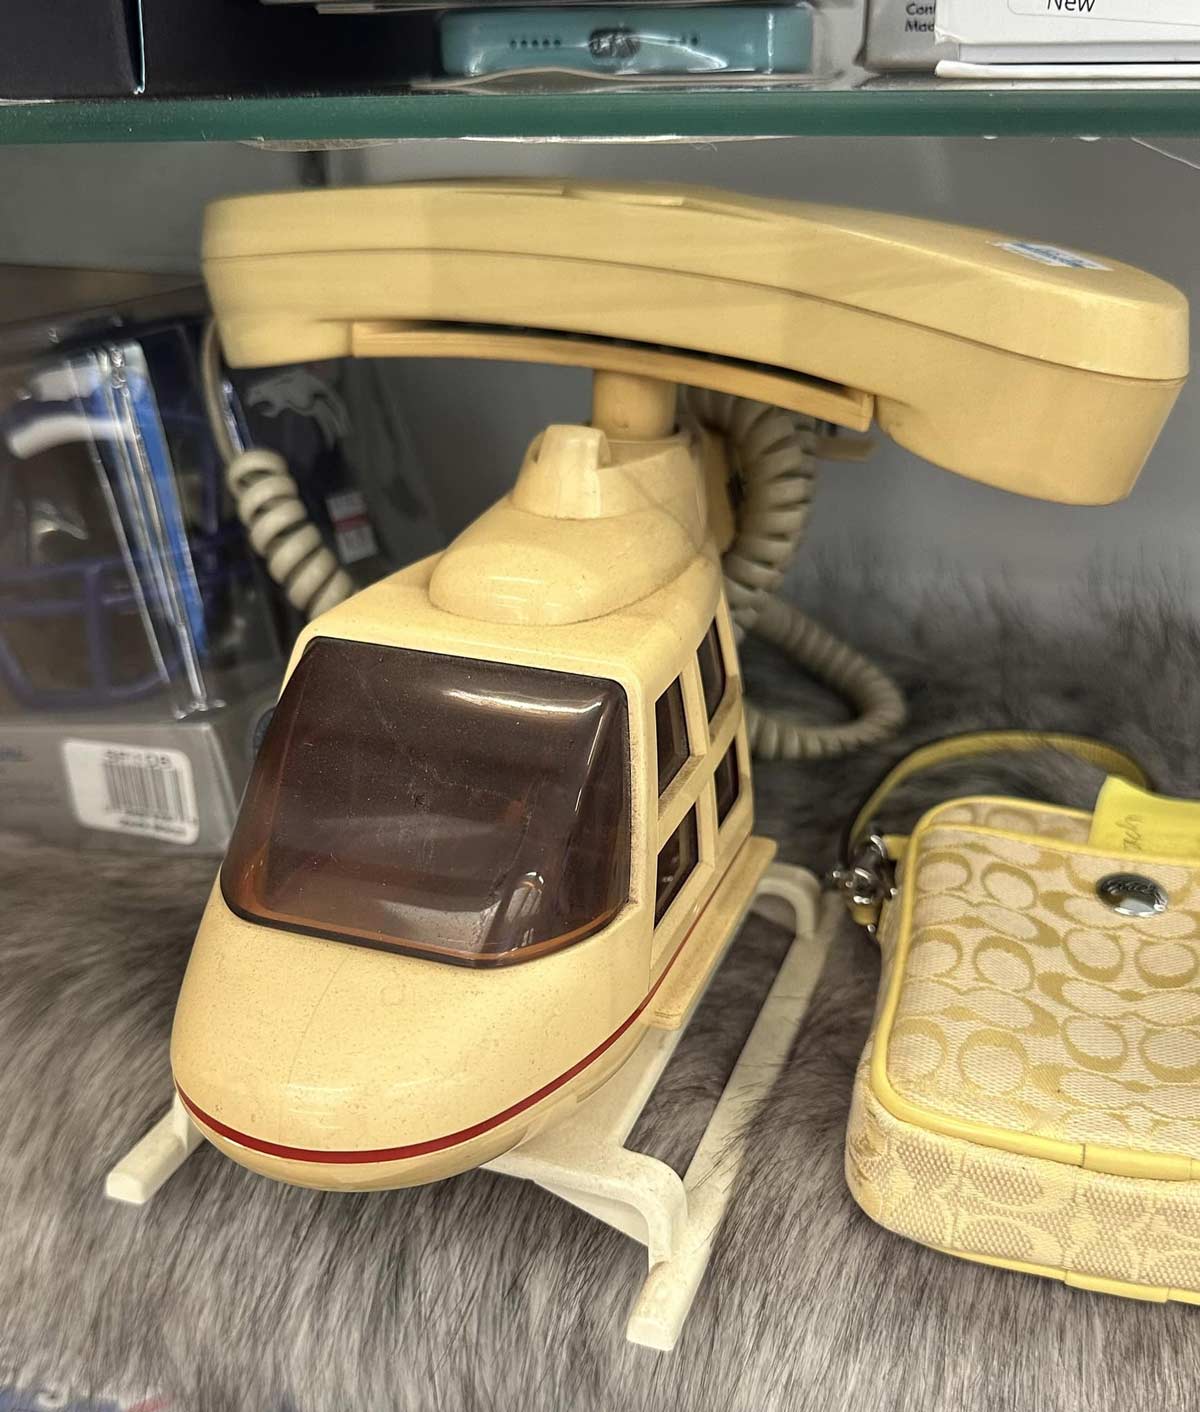 Helicopter phone found at Goodwill